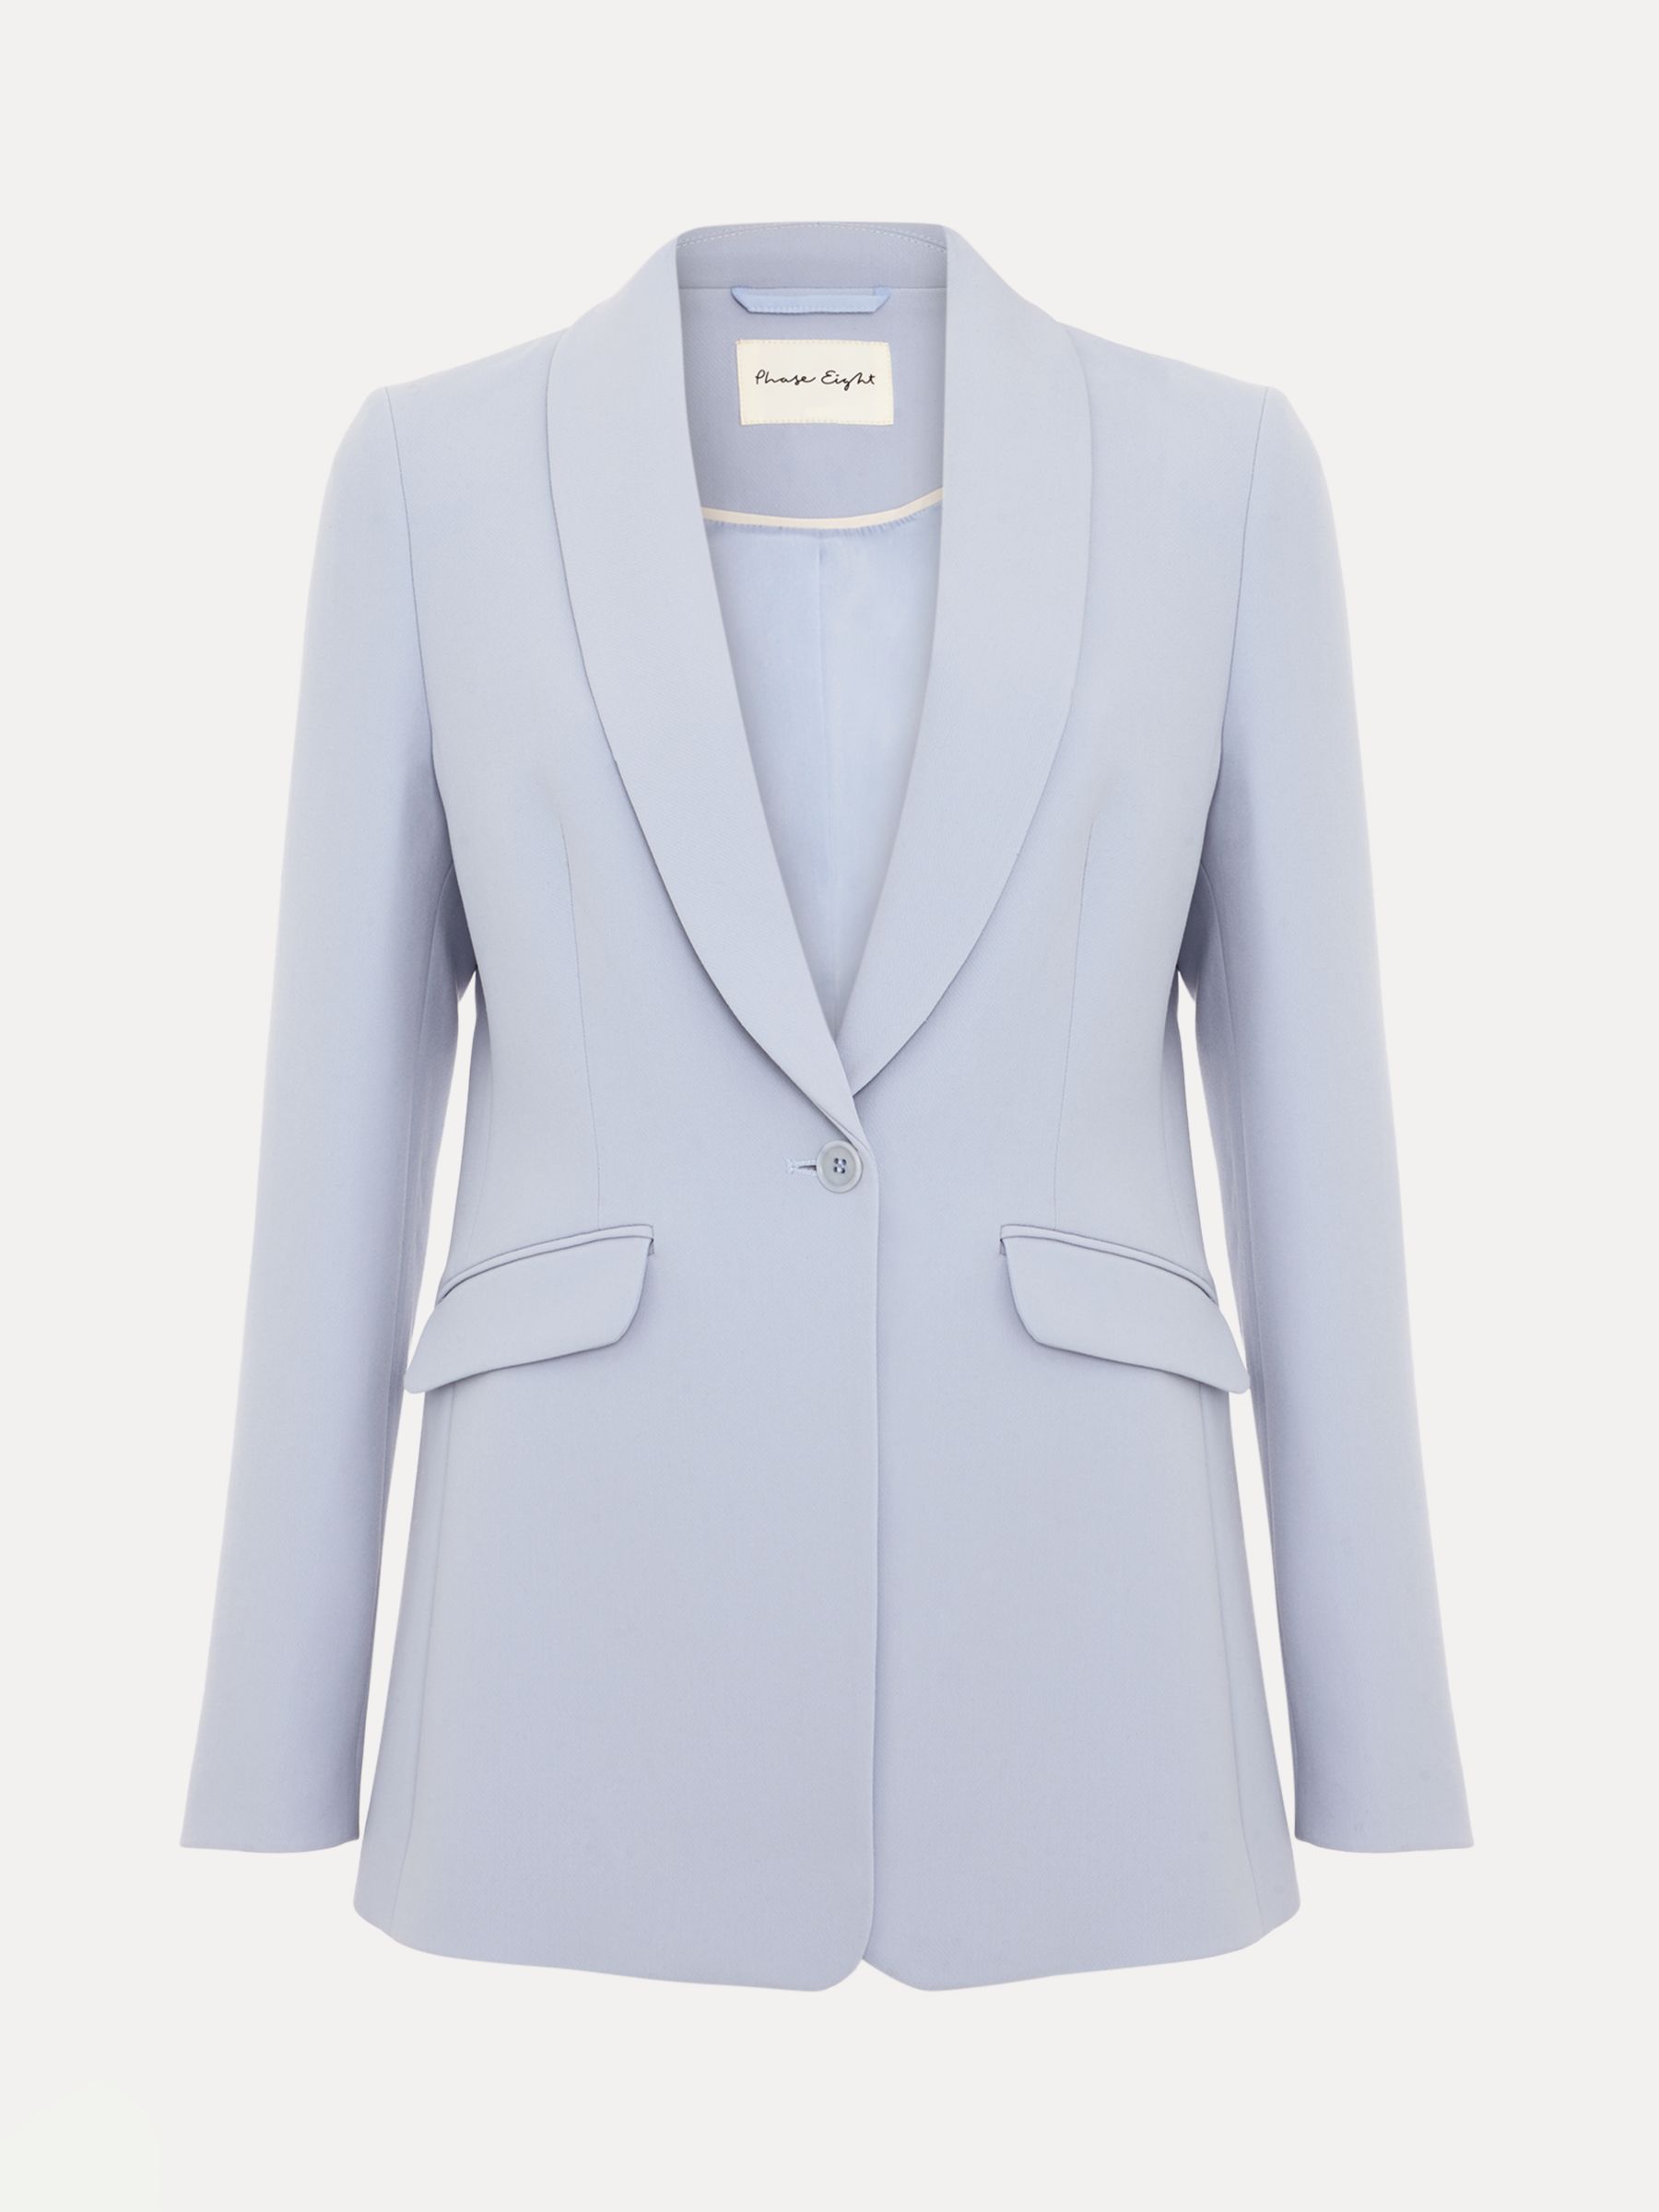 Buy Phase Eight Alexis Shawl Collar Suit Jacket, Pale Blue Online at johnlewis.com